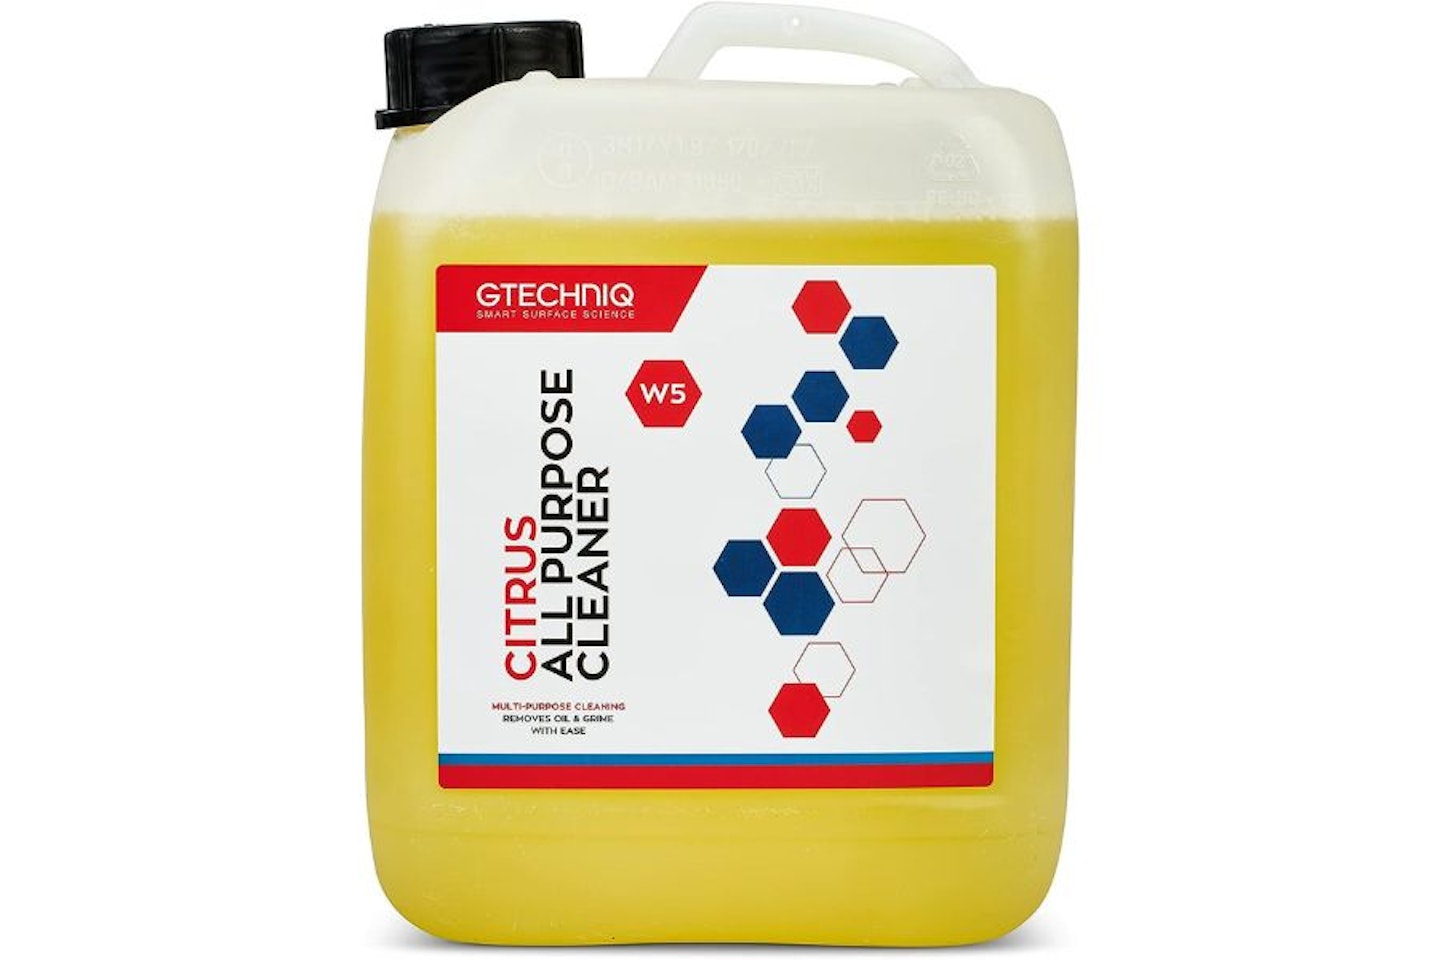 Choosing the Right All-Purpose Cleaner for Your Vehicle